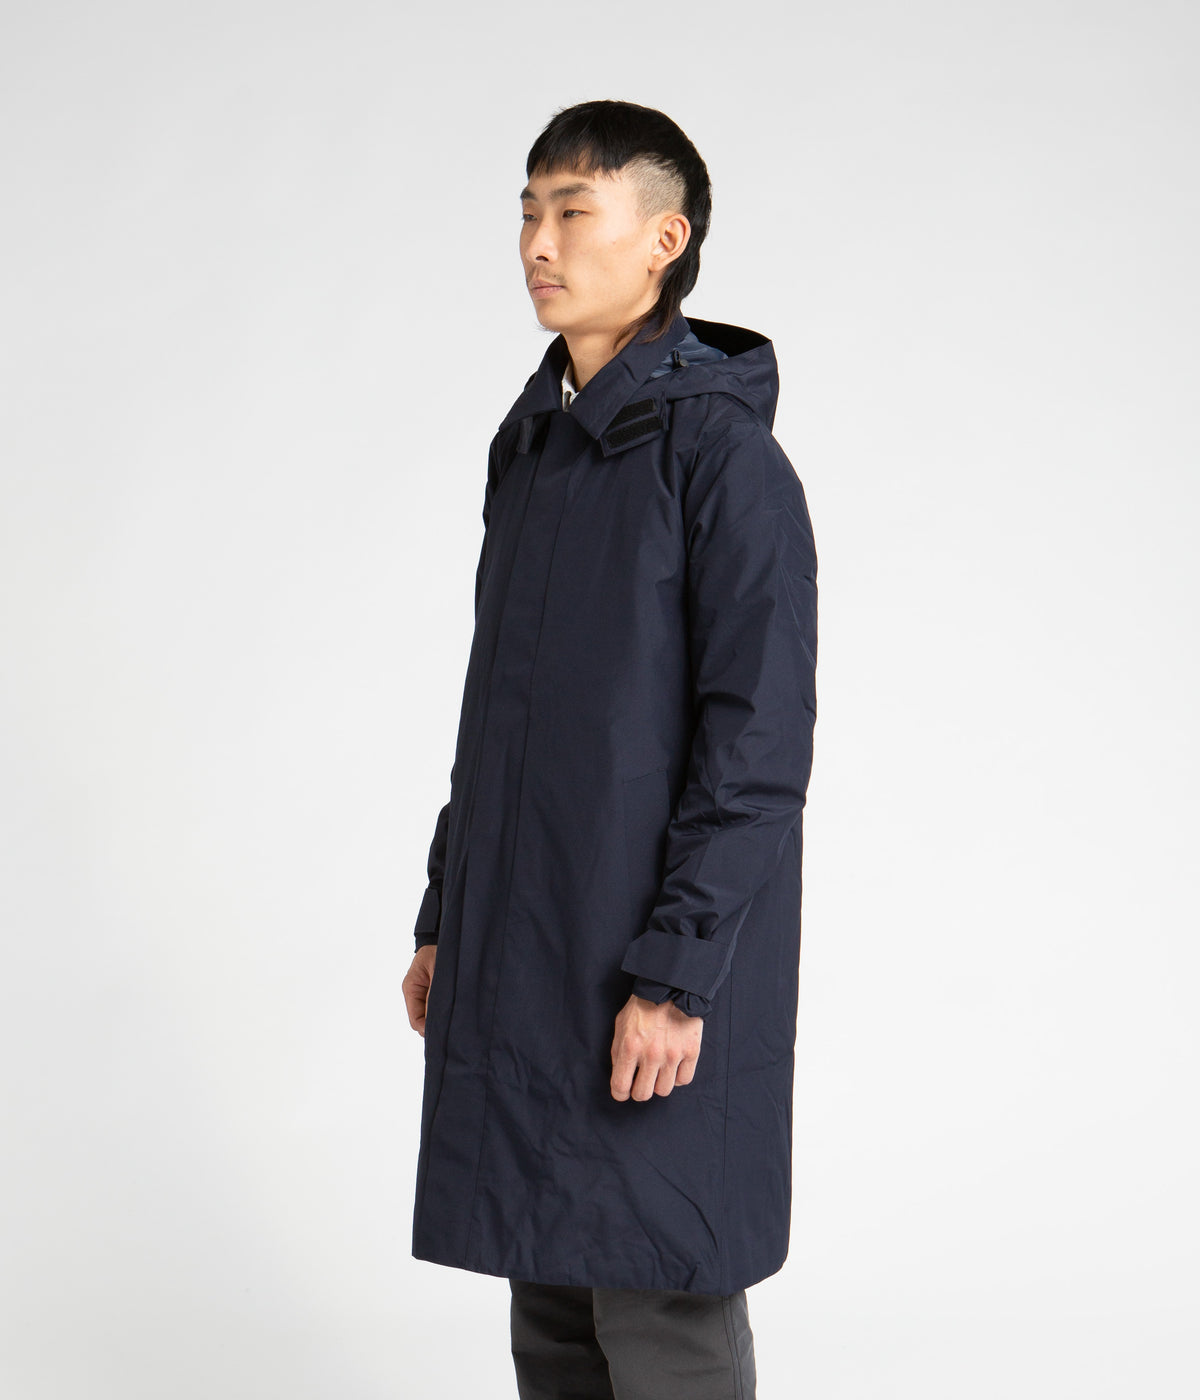 Dark Infinium Jacket Always Projects in Gore-Tex - Thor Colour Navy Norse 2.0 |